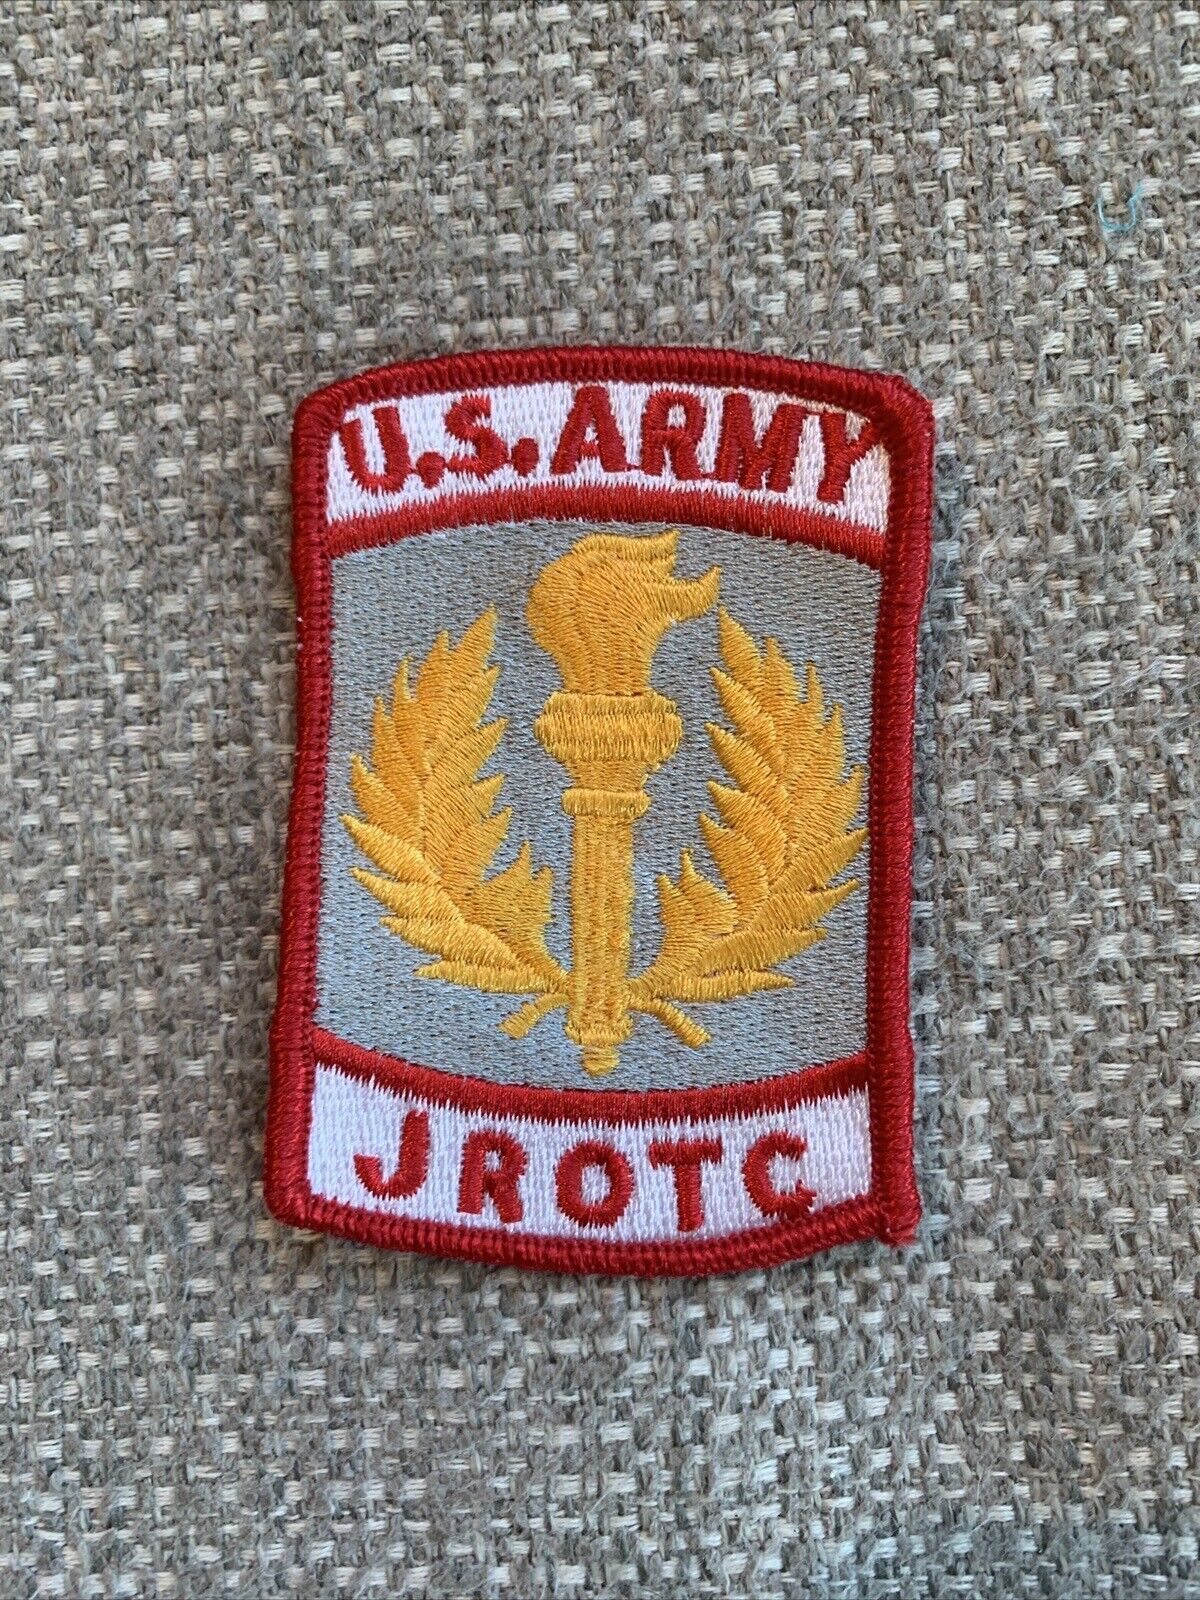 Vintage US Army ROTC Embroidered Uniform Patch